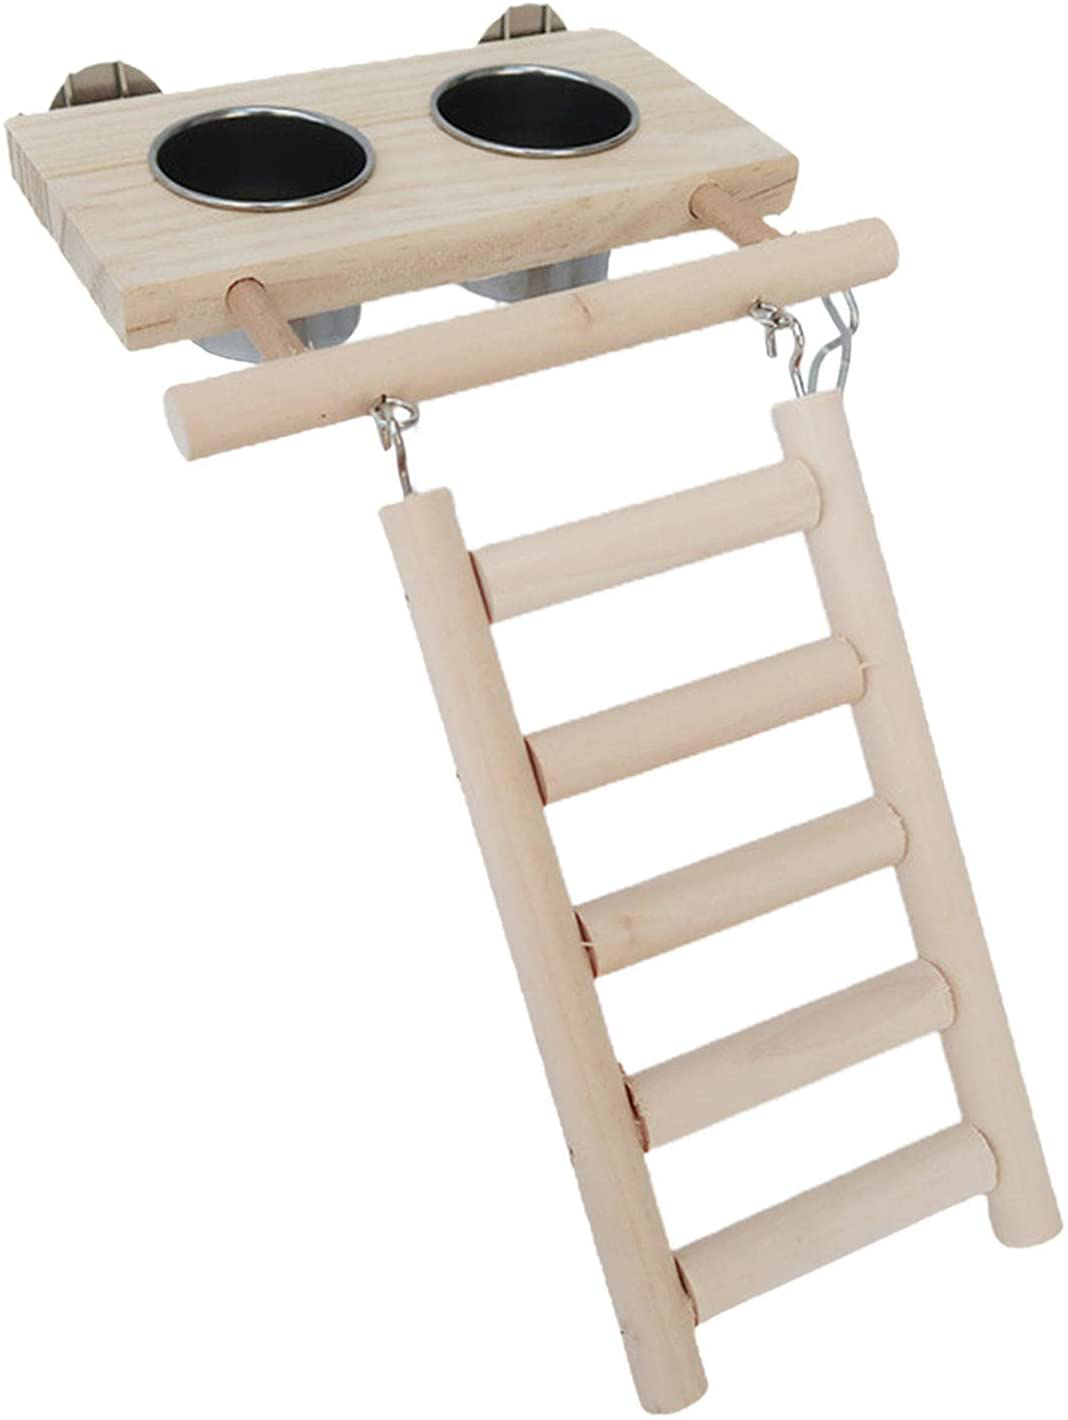 Gazechimp Pet Play Stand for Birds-Parrot Playstand Bird Cockatiel Playground Wood Perch Gym Climbing Ladder Feeder Cups Toys Exercise Play Gift